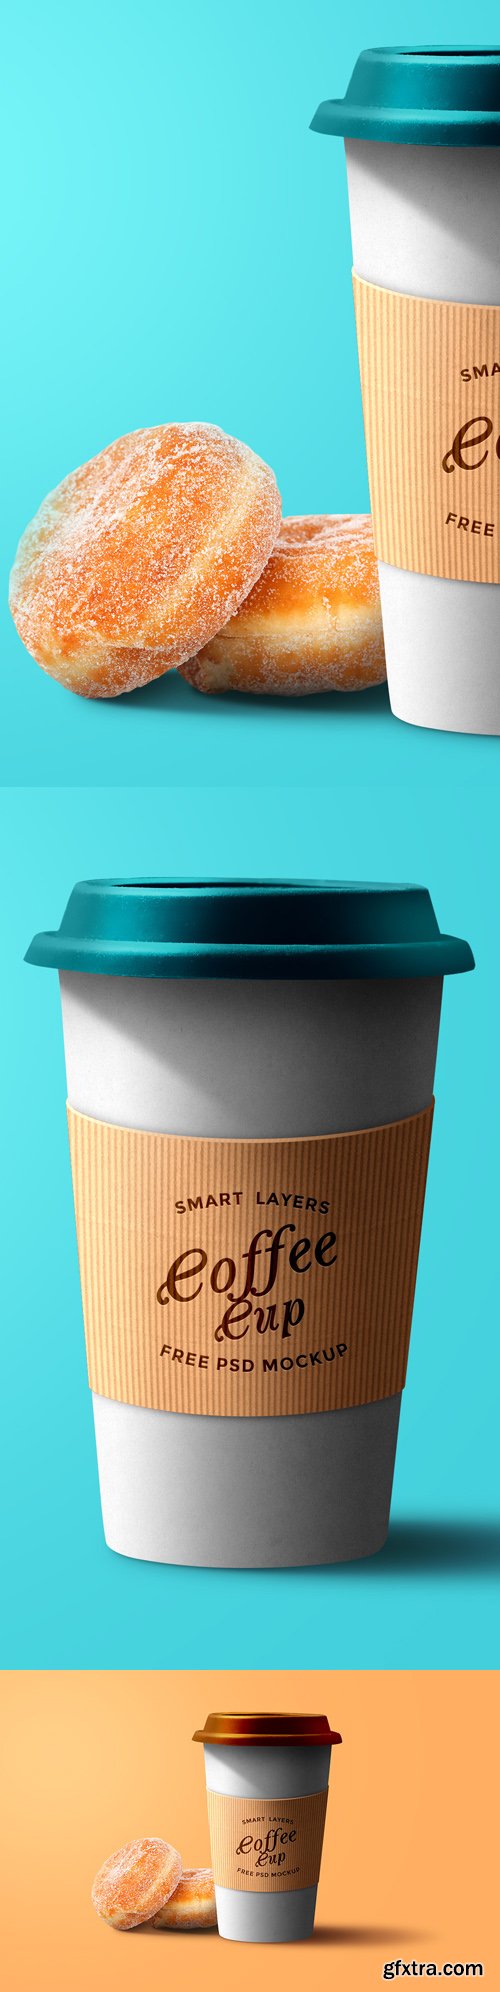 Paper Coffee Cup Mockup, part 7